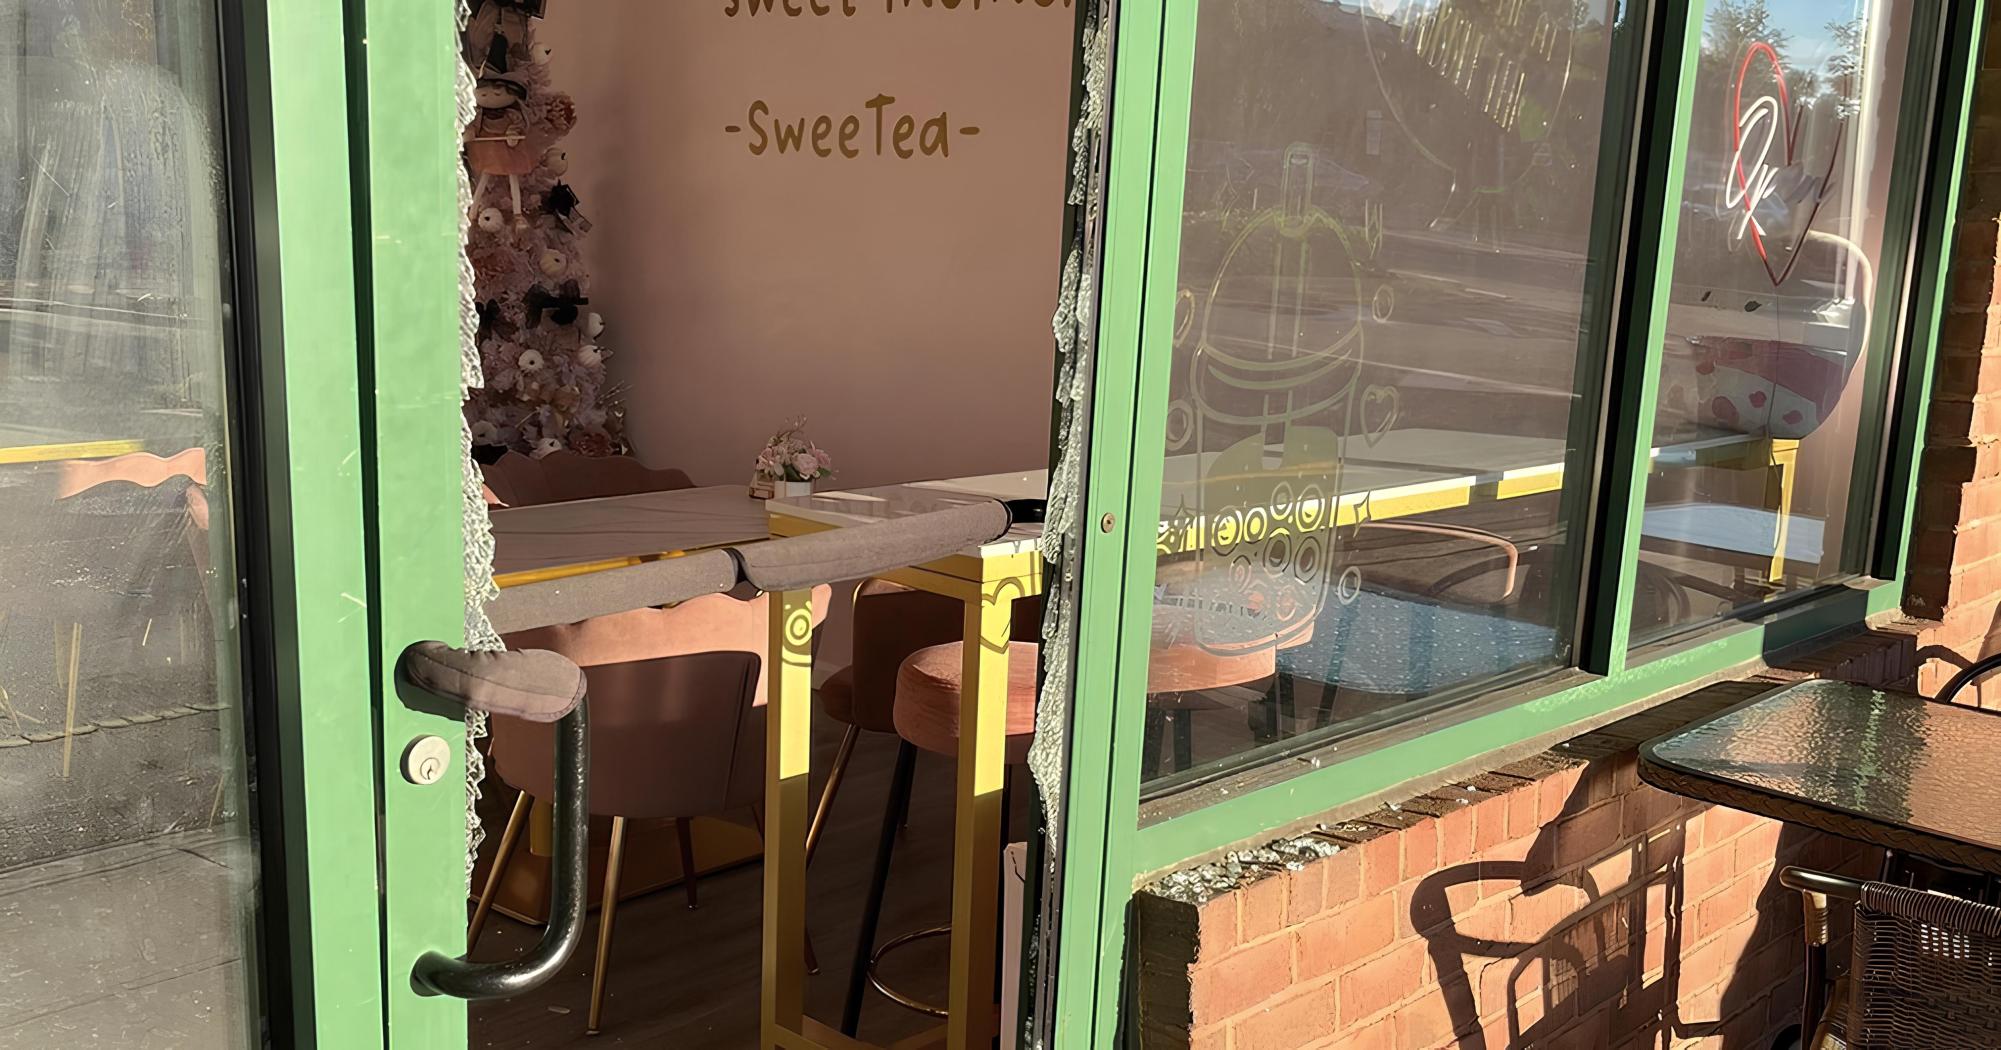 Damages at the SweeTea Boba shop with broken glass covering the entrance in the early Saturday morning. Image sourced from the SweeTea instagram.